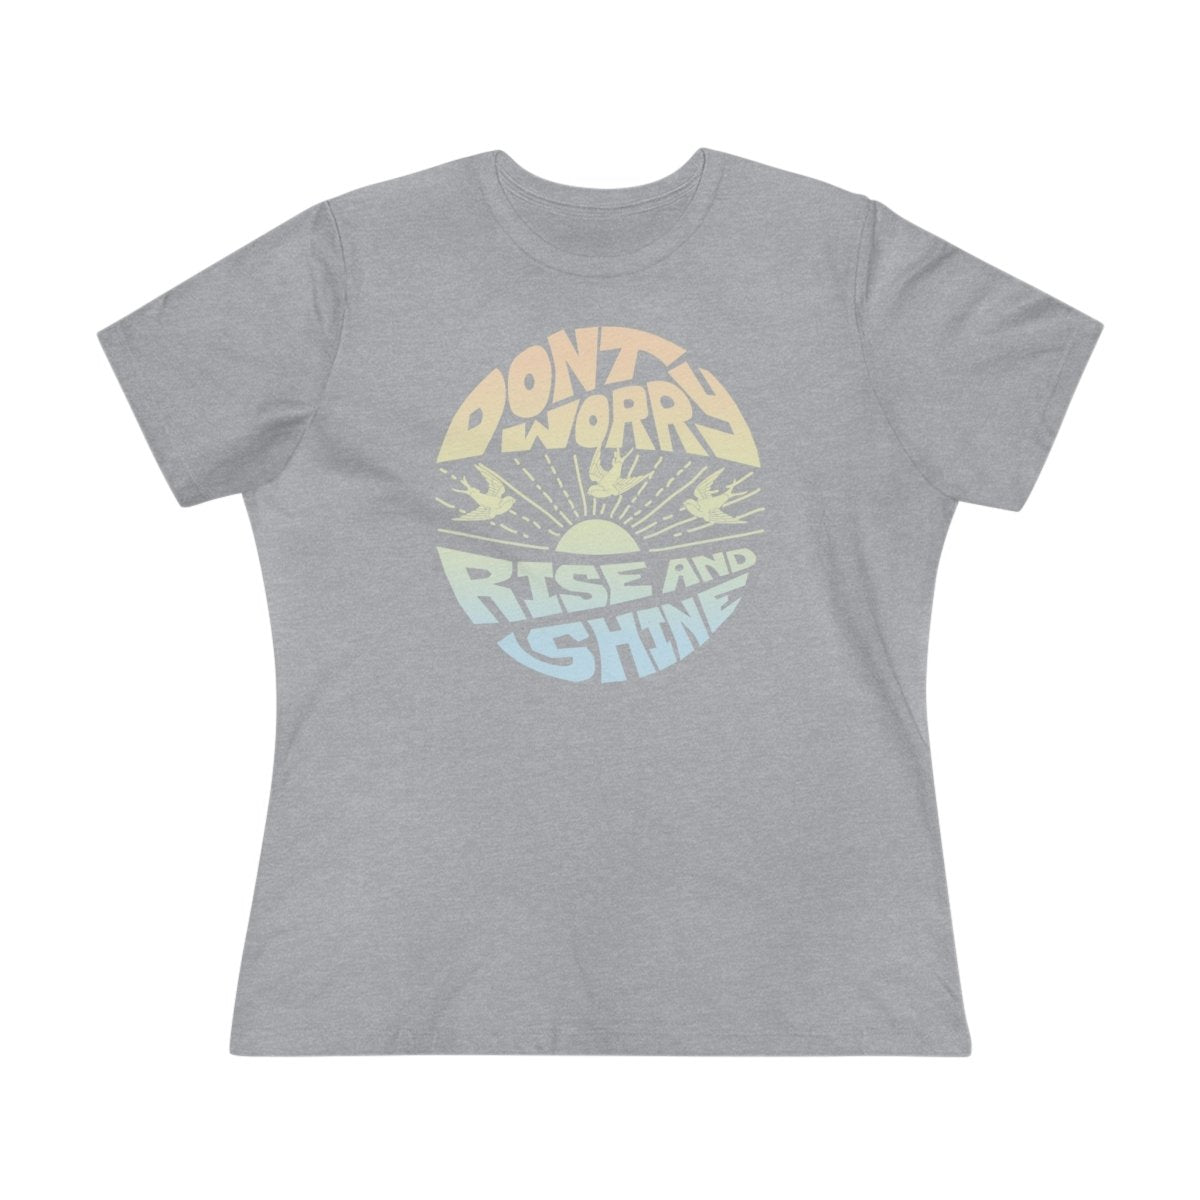 Don't Worry Women's Premium Relaxed Fit T-Shirt, Rise To Challenges and Shine Inspiration